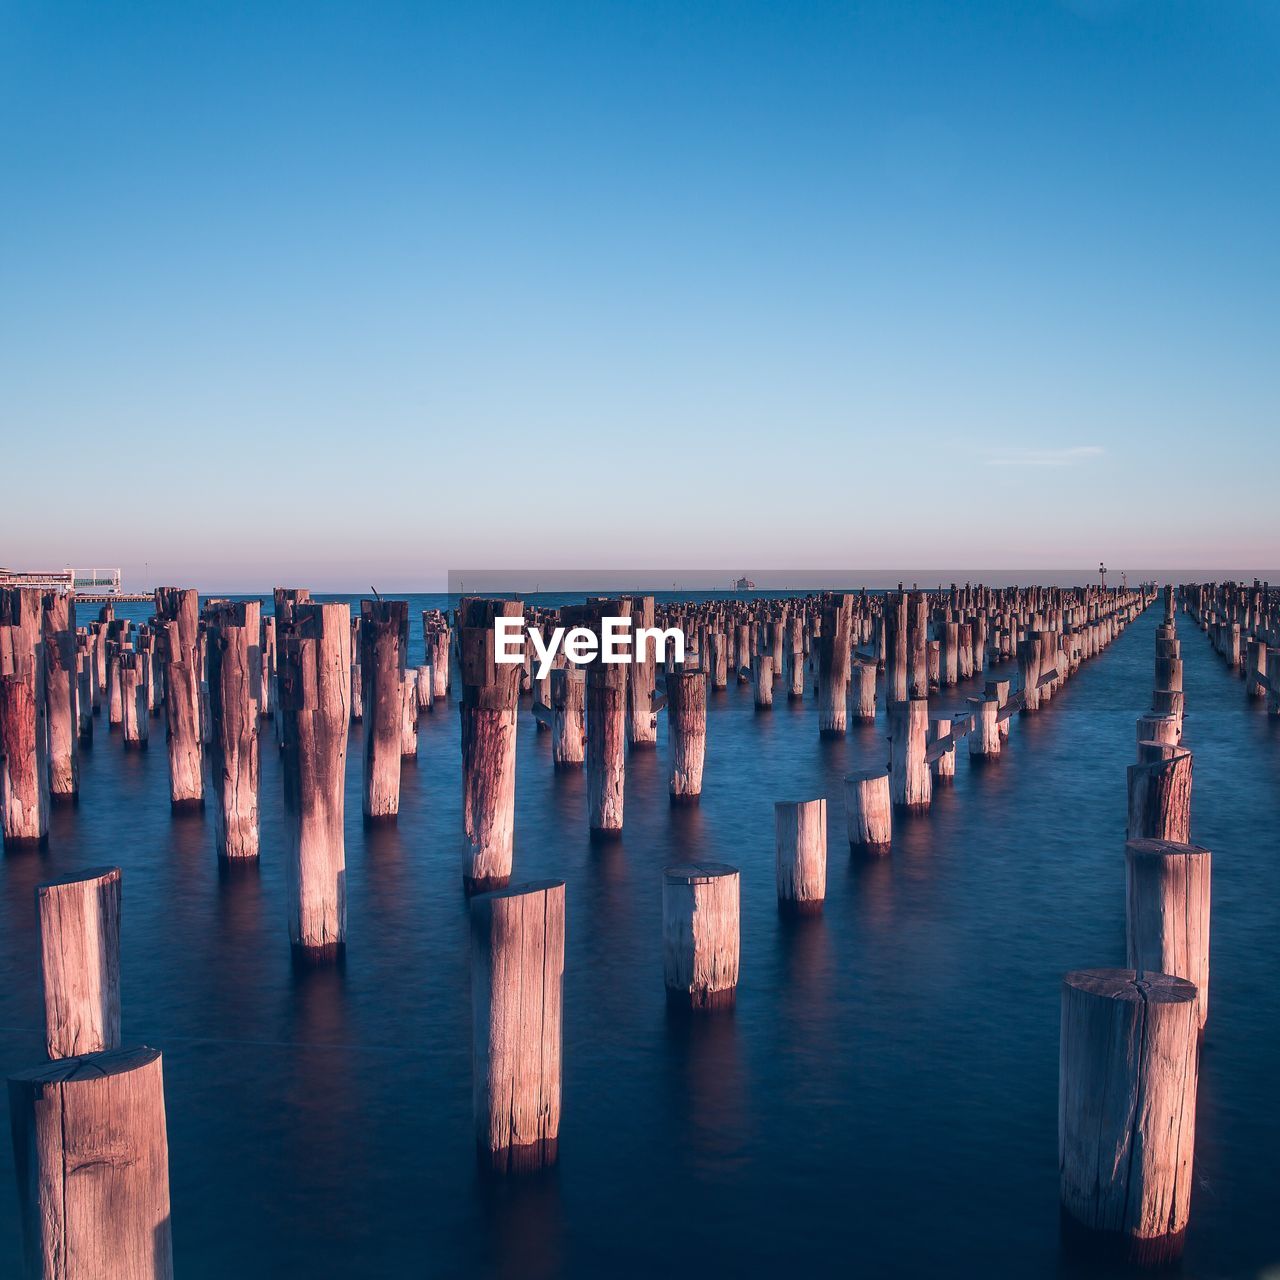 Wooden posts at sea against clear sky